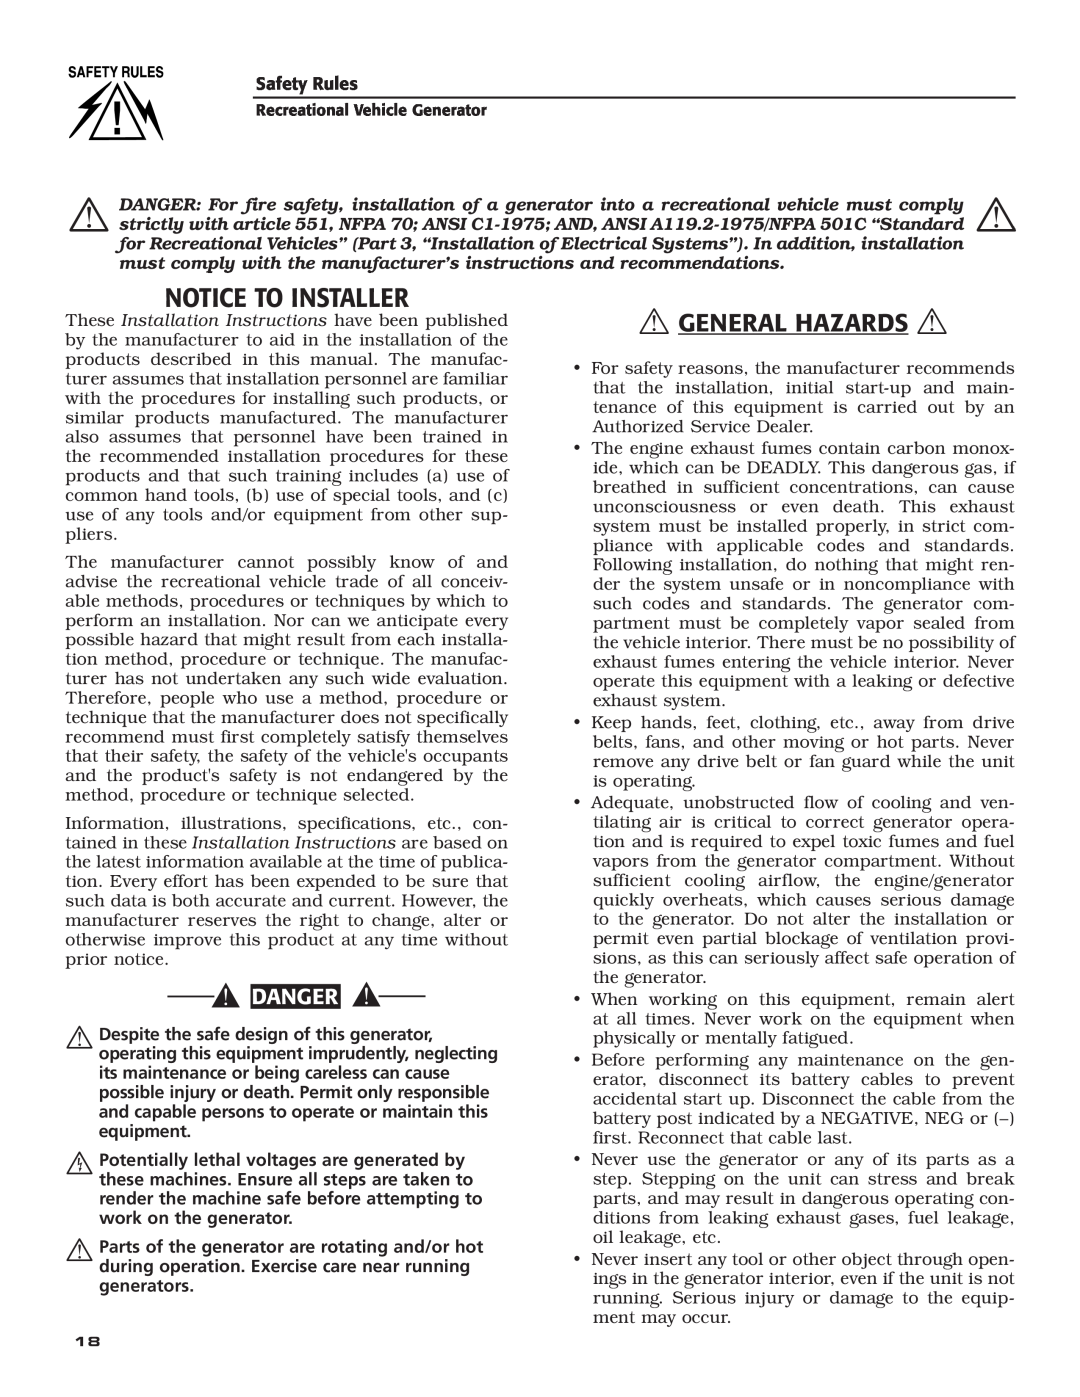 Guardian Technologies 004708-0, 004700-0 owner manual Notice To Installer,  General Hazards , Danger, Safety Rules 